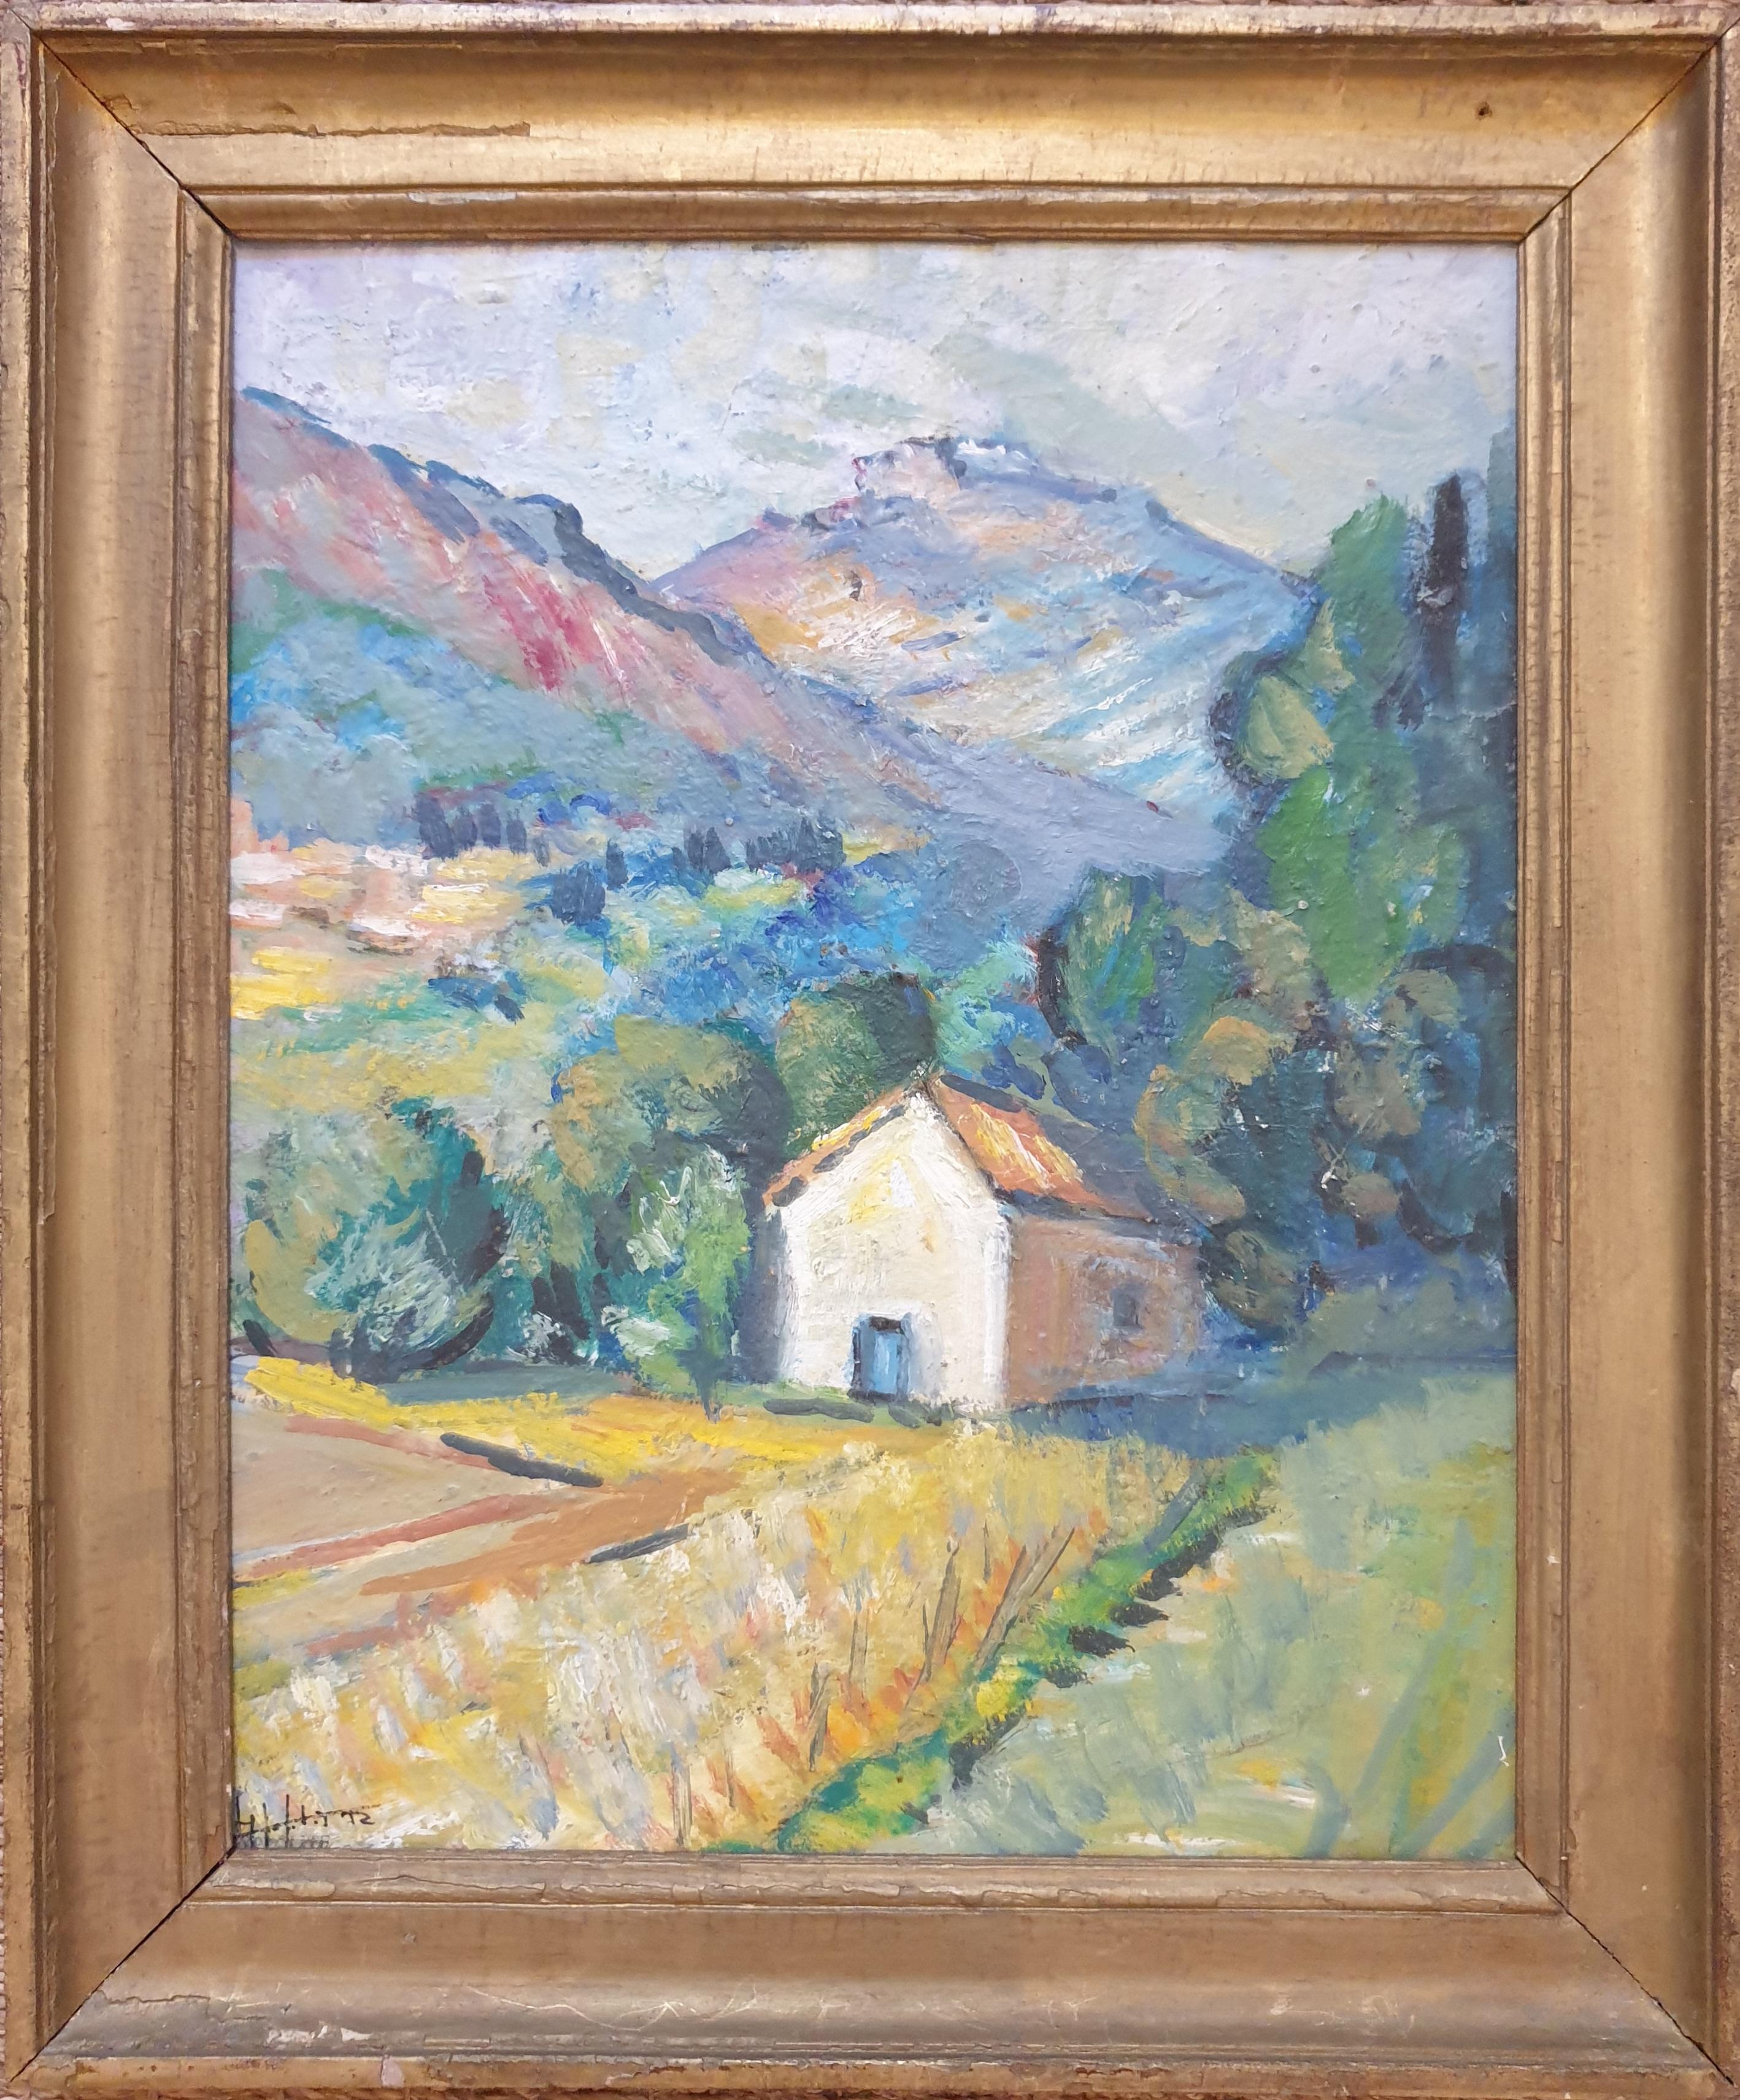 Hyppolite Roger Landscape Painting - Mid-century Fauvist Landscape in the South of France. 